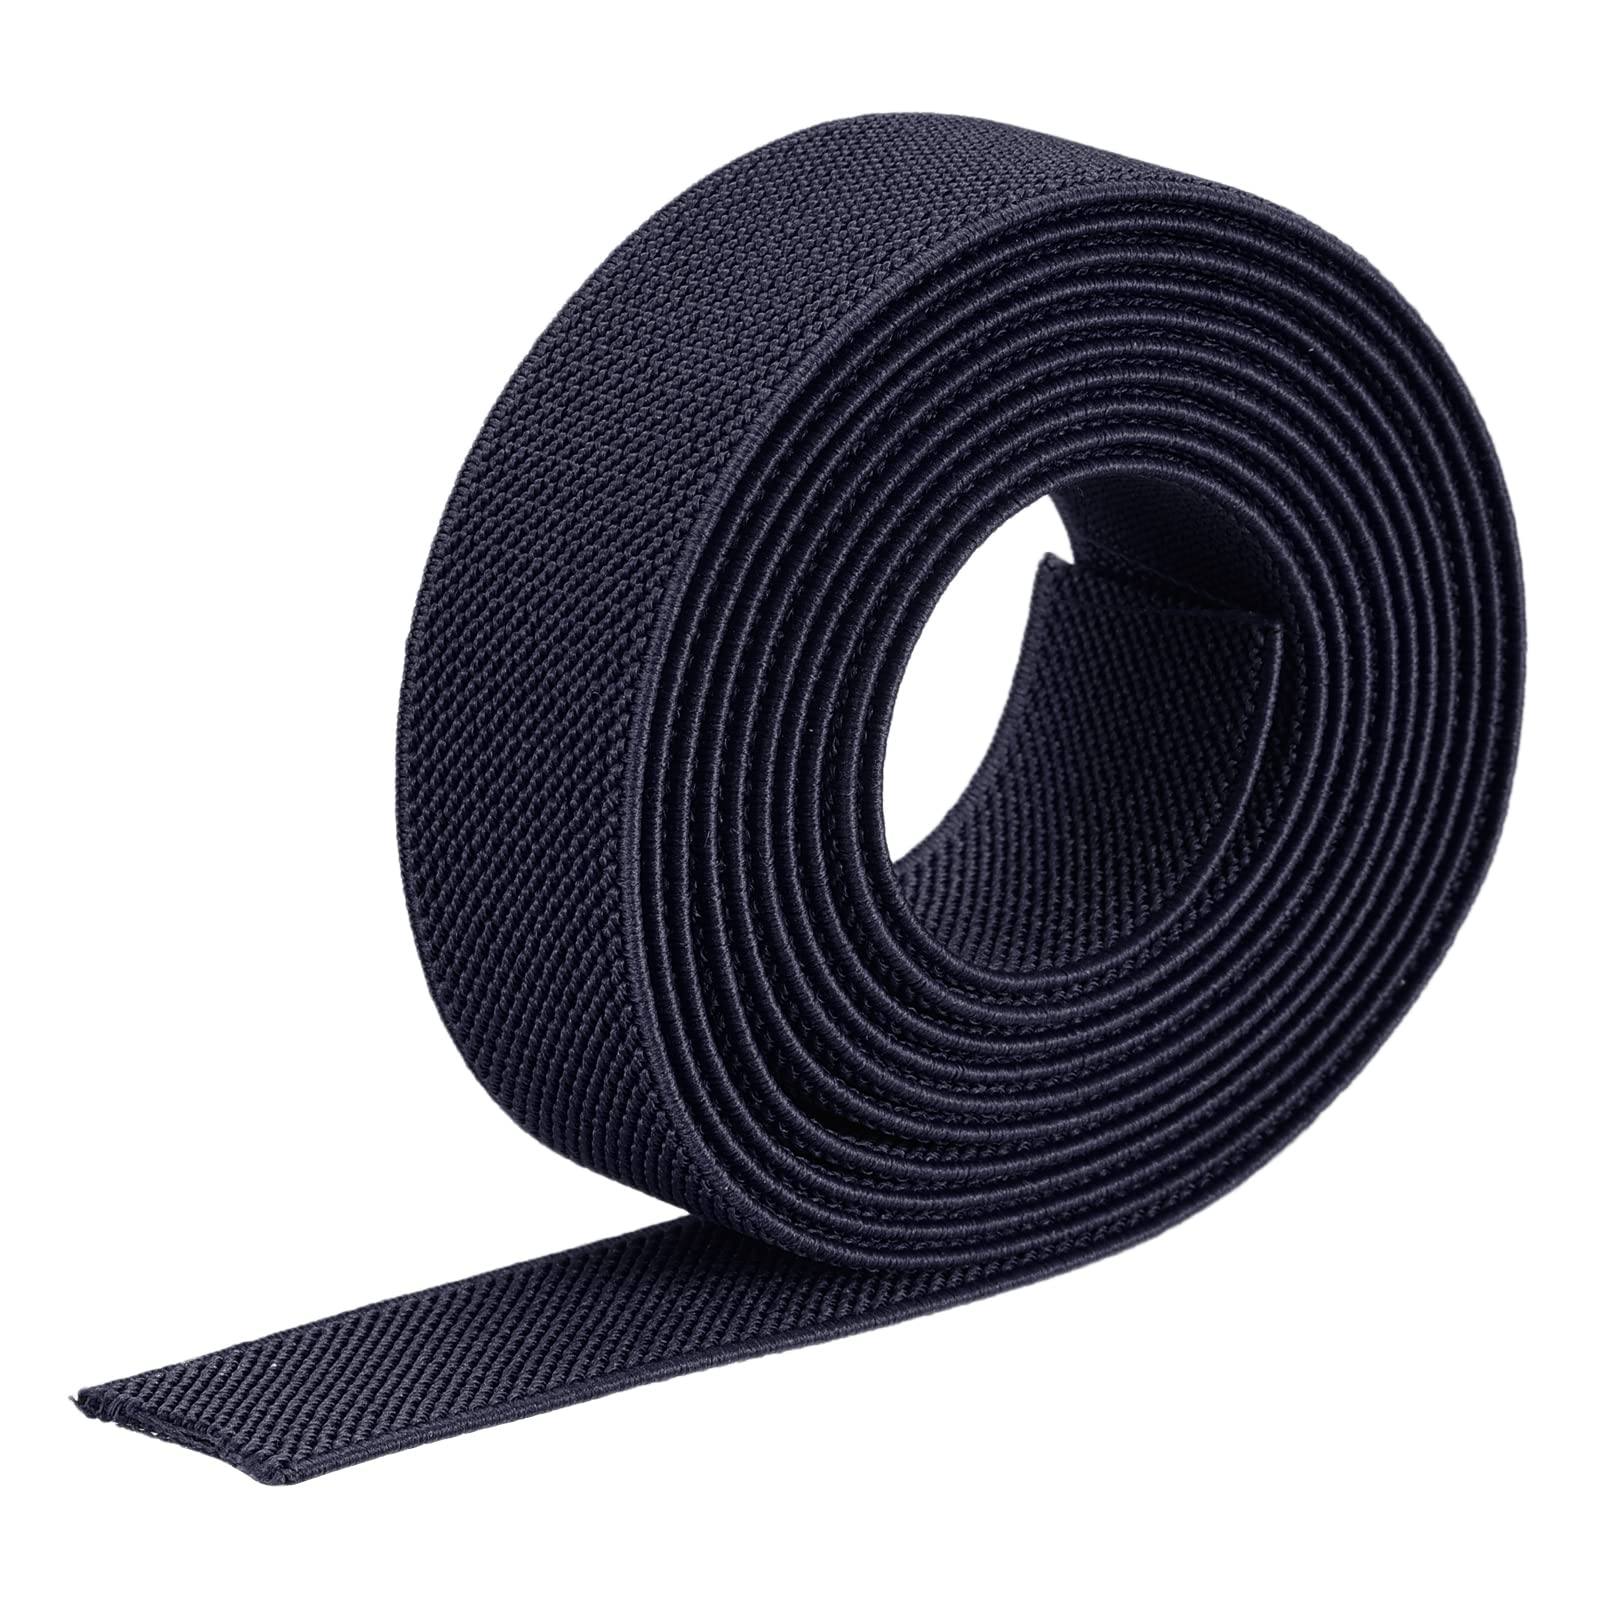 MECCANIXITY Twill Wide Elastic Band Double-Side 1 inch Flat 2 Yard Woven  Elastic Band Knit Elastic Spool Heavy Stretch Strap Navy for Sewing  Waistband 2 Yard Navy